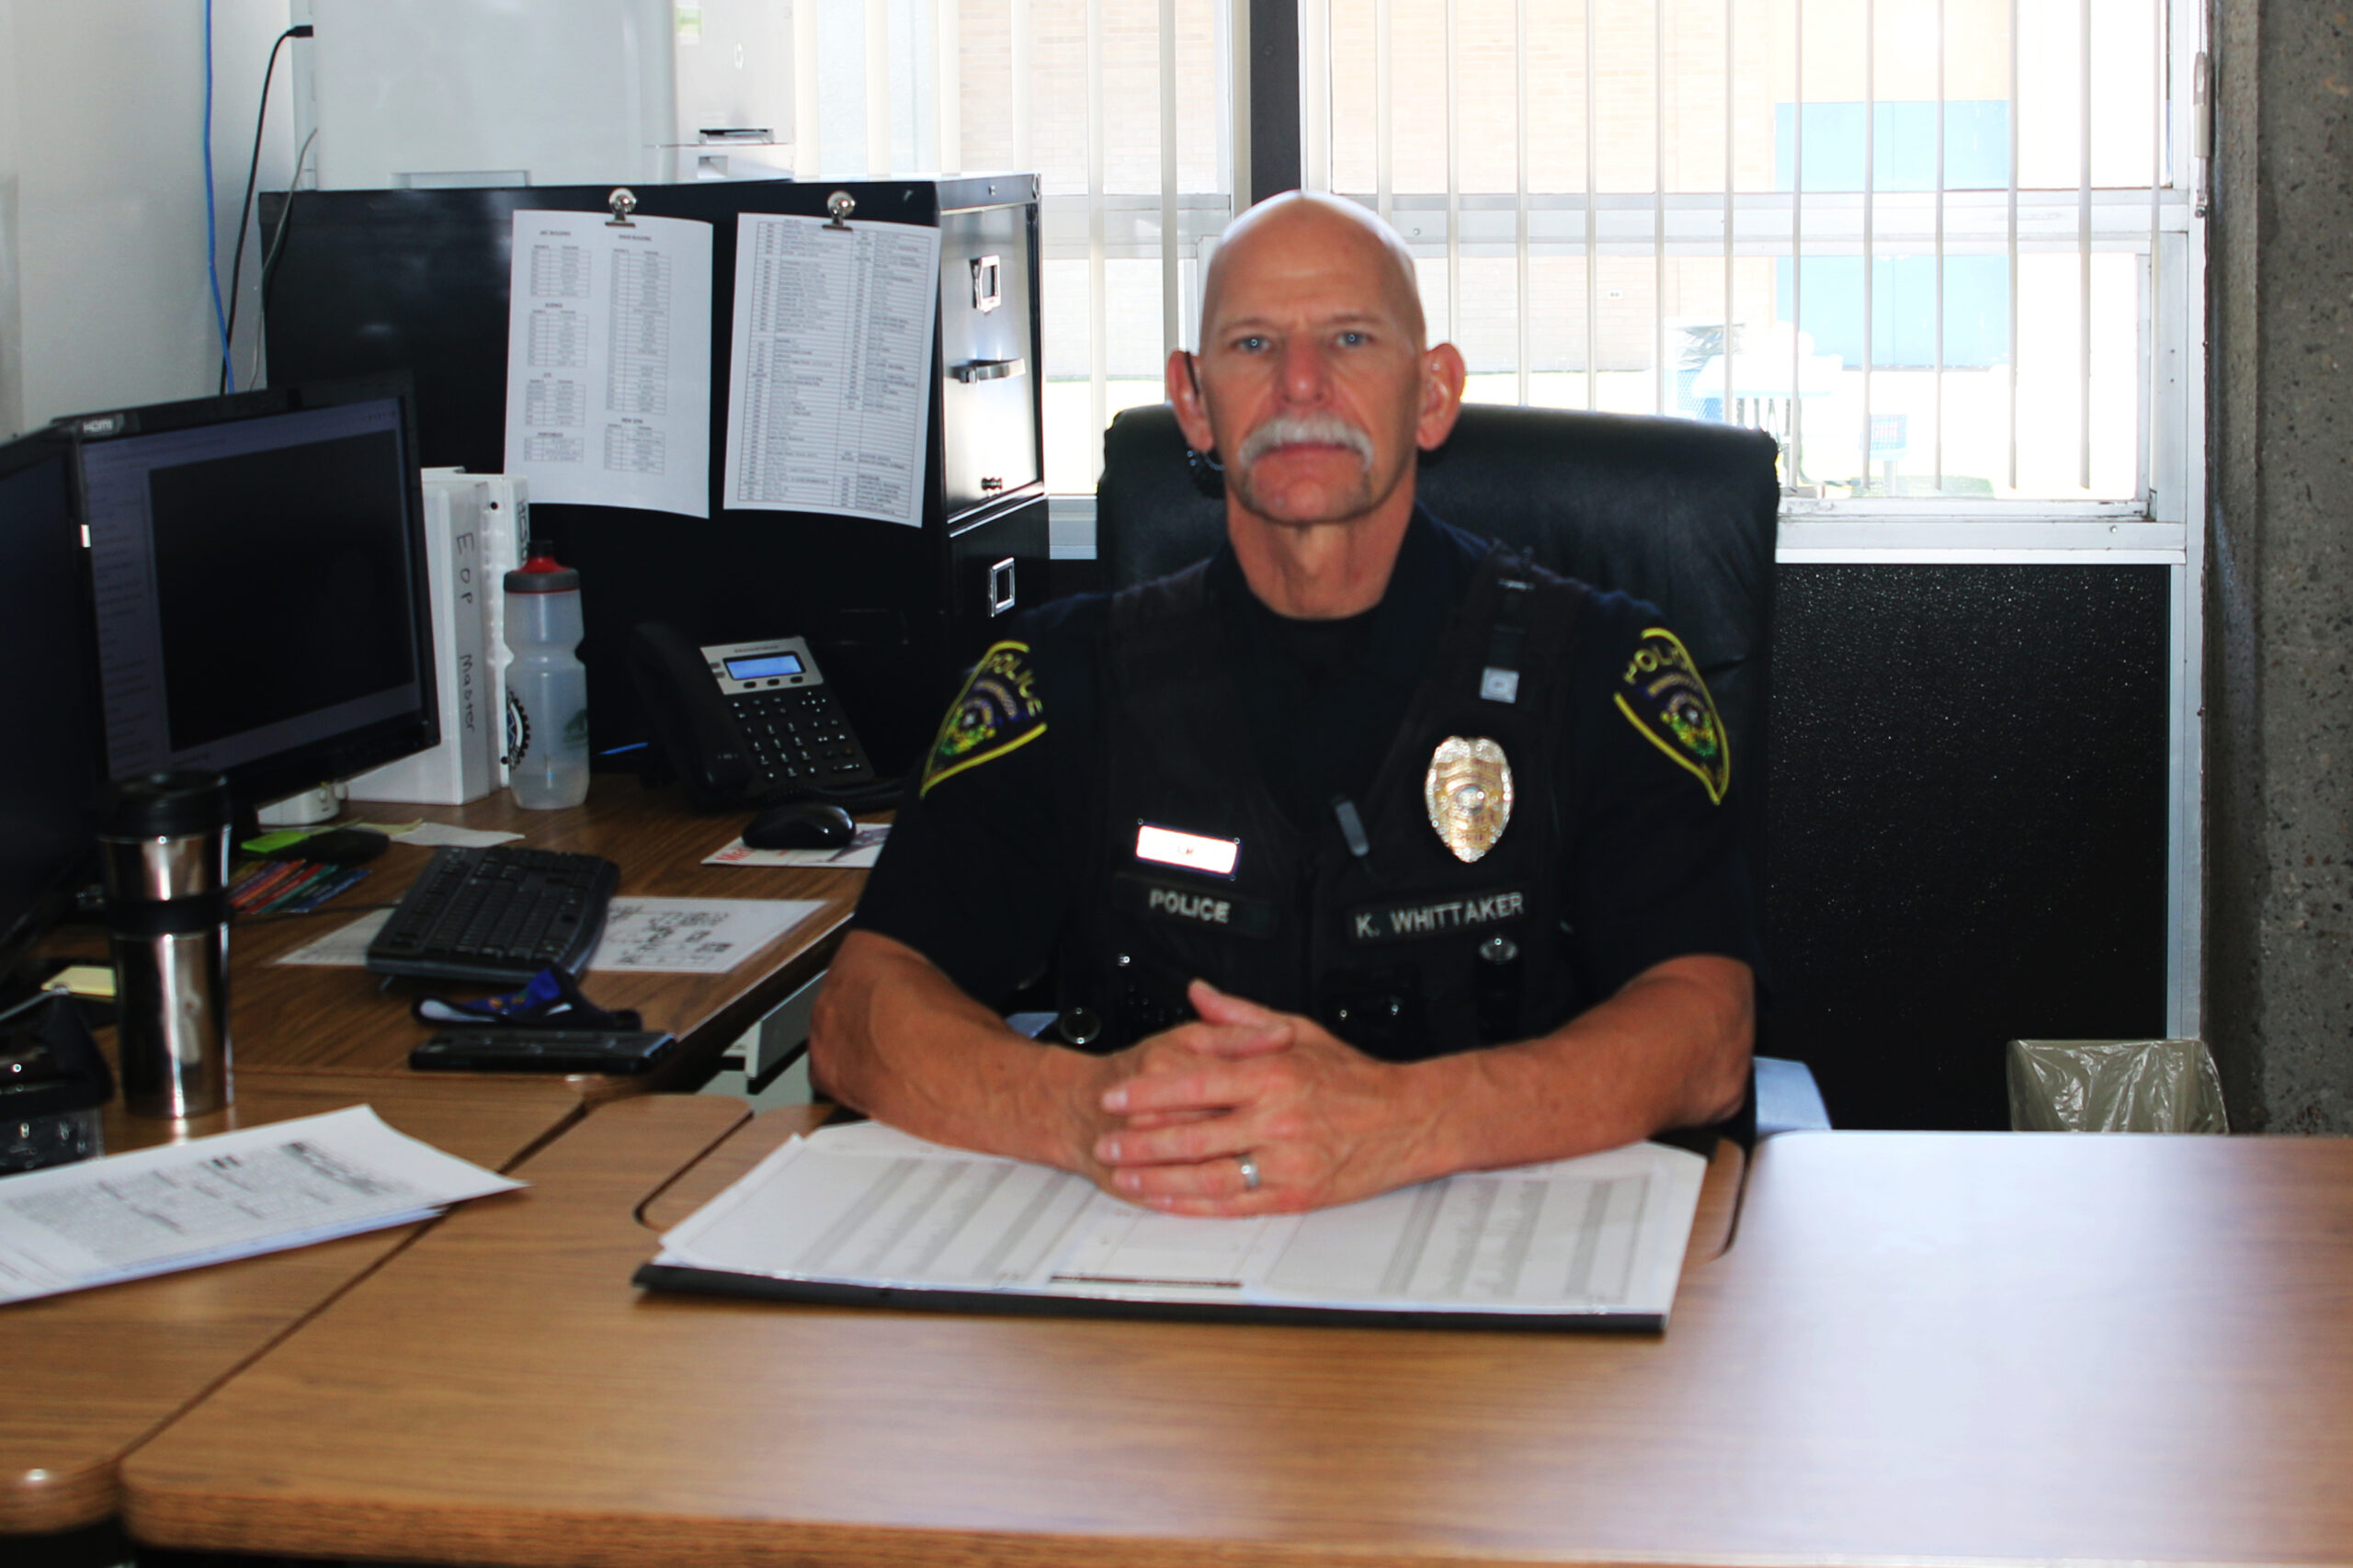 Get to know School Resource Officer Whittaker